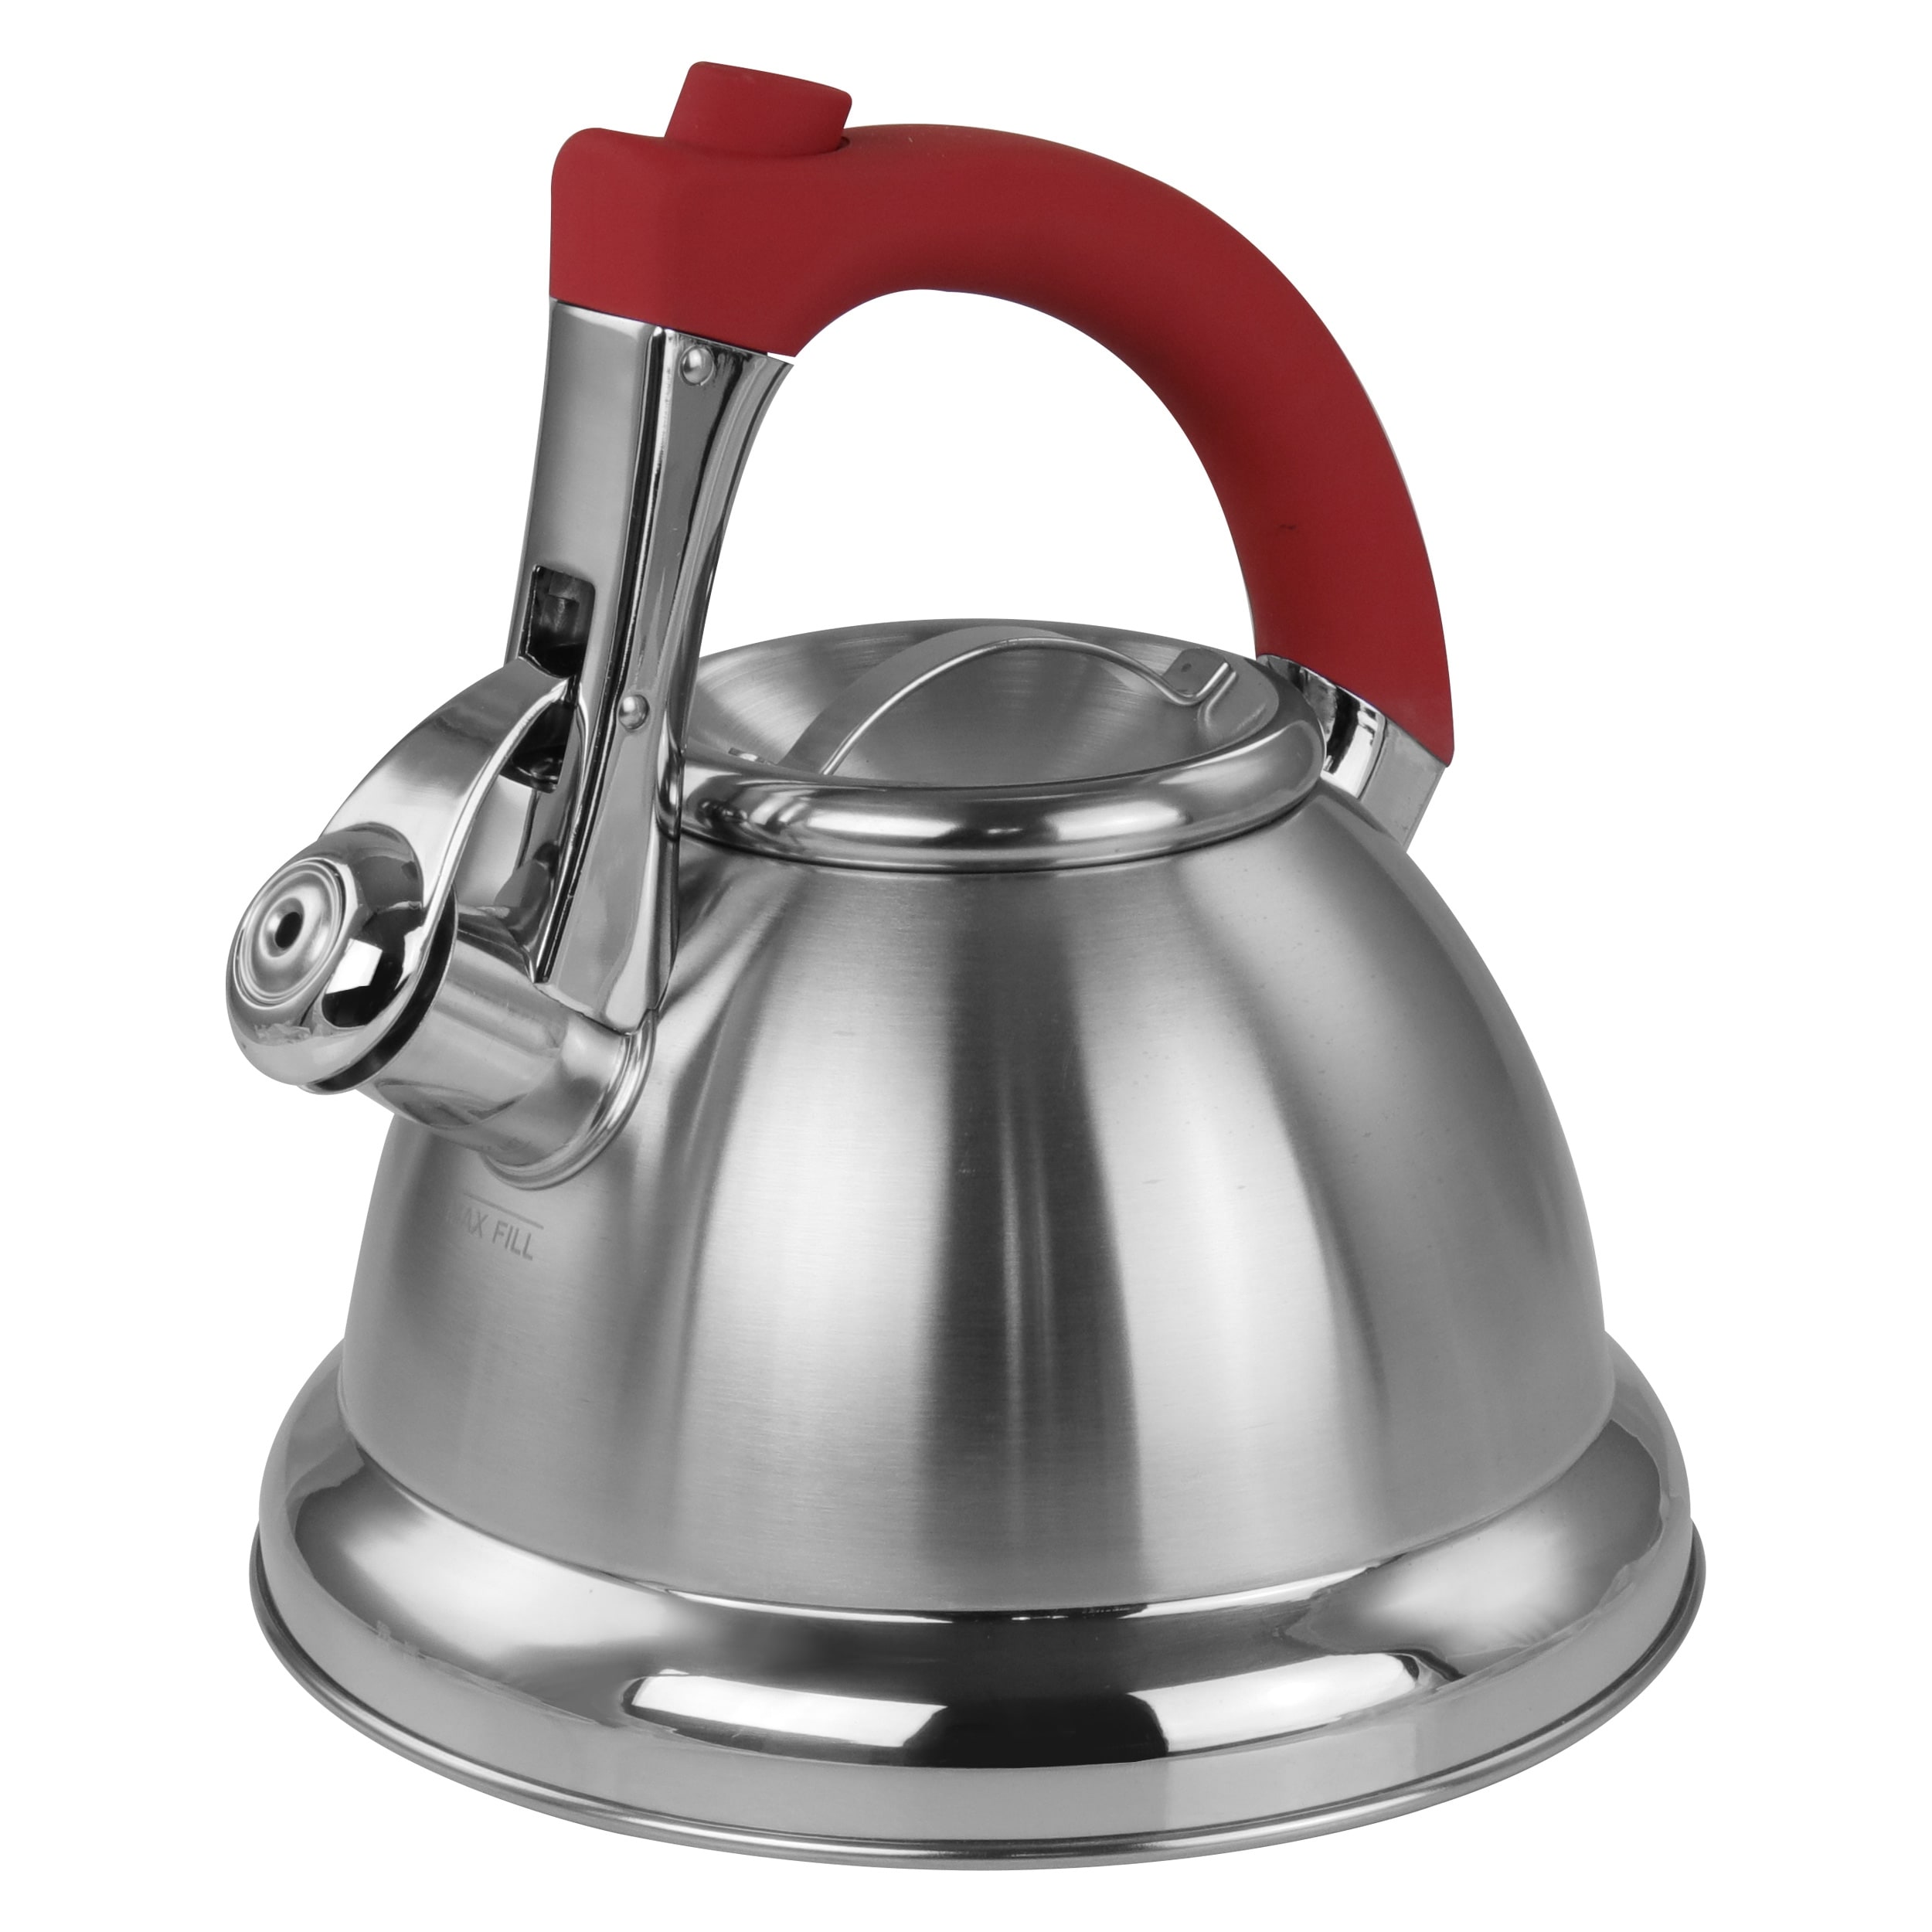 https://ak1.ostkcdn.com/images/products/is/images/direct/020311b799ccc27f1d76405b5b5c0fb7dfc92569/Mr.-Coffee-1.8-quart-Stainless-Steel-Whistling-Tea-Kettle.jpg